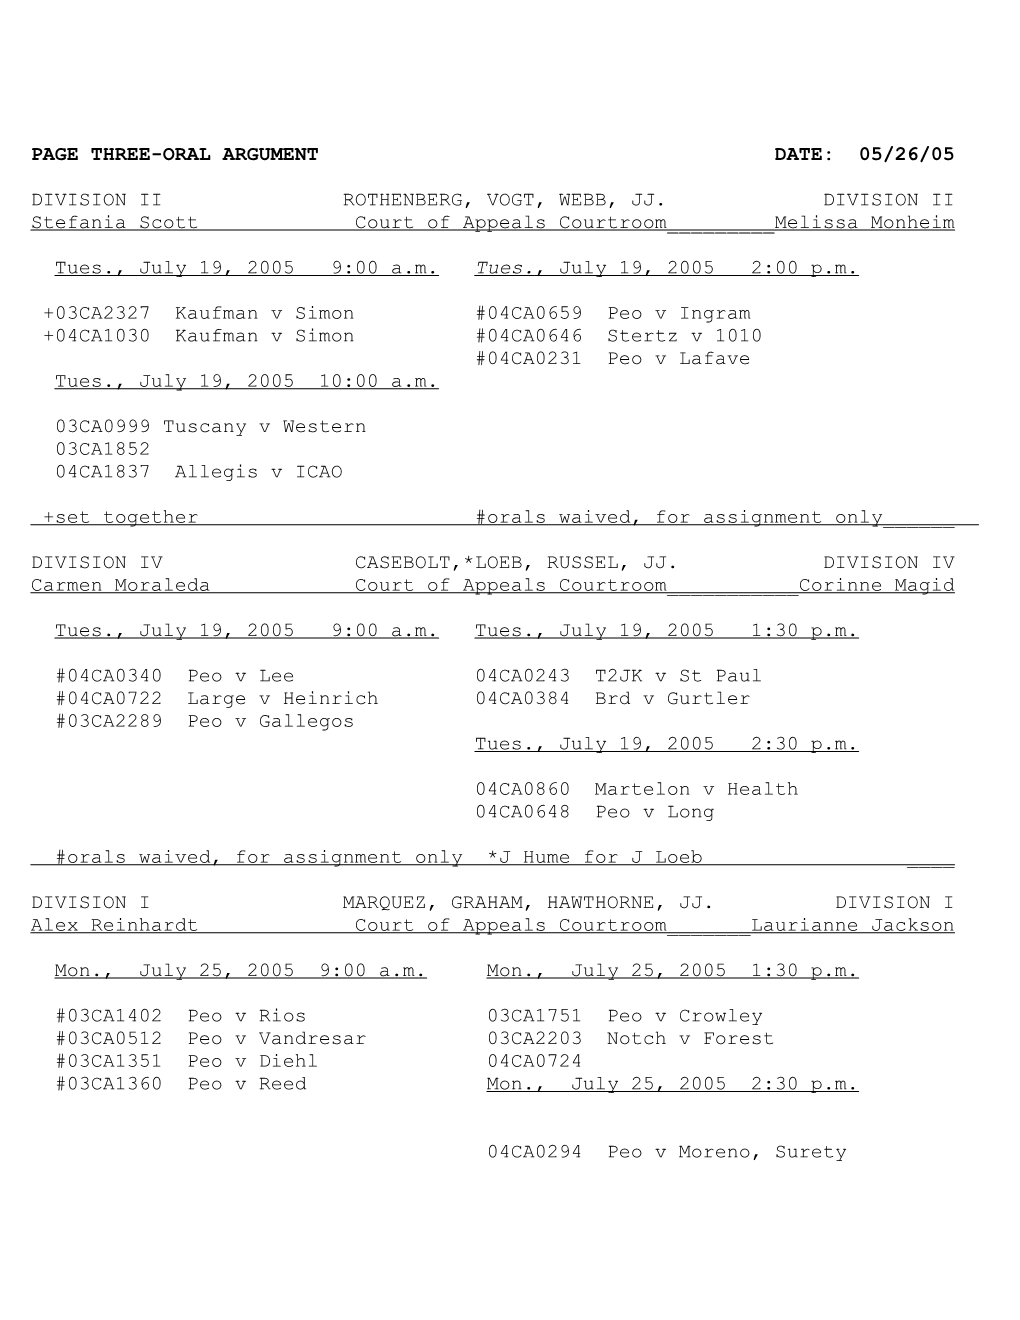 Page One-Oral Argument Date: 05/26/05